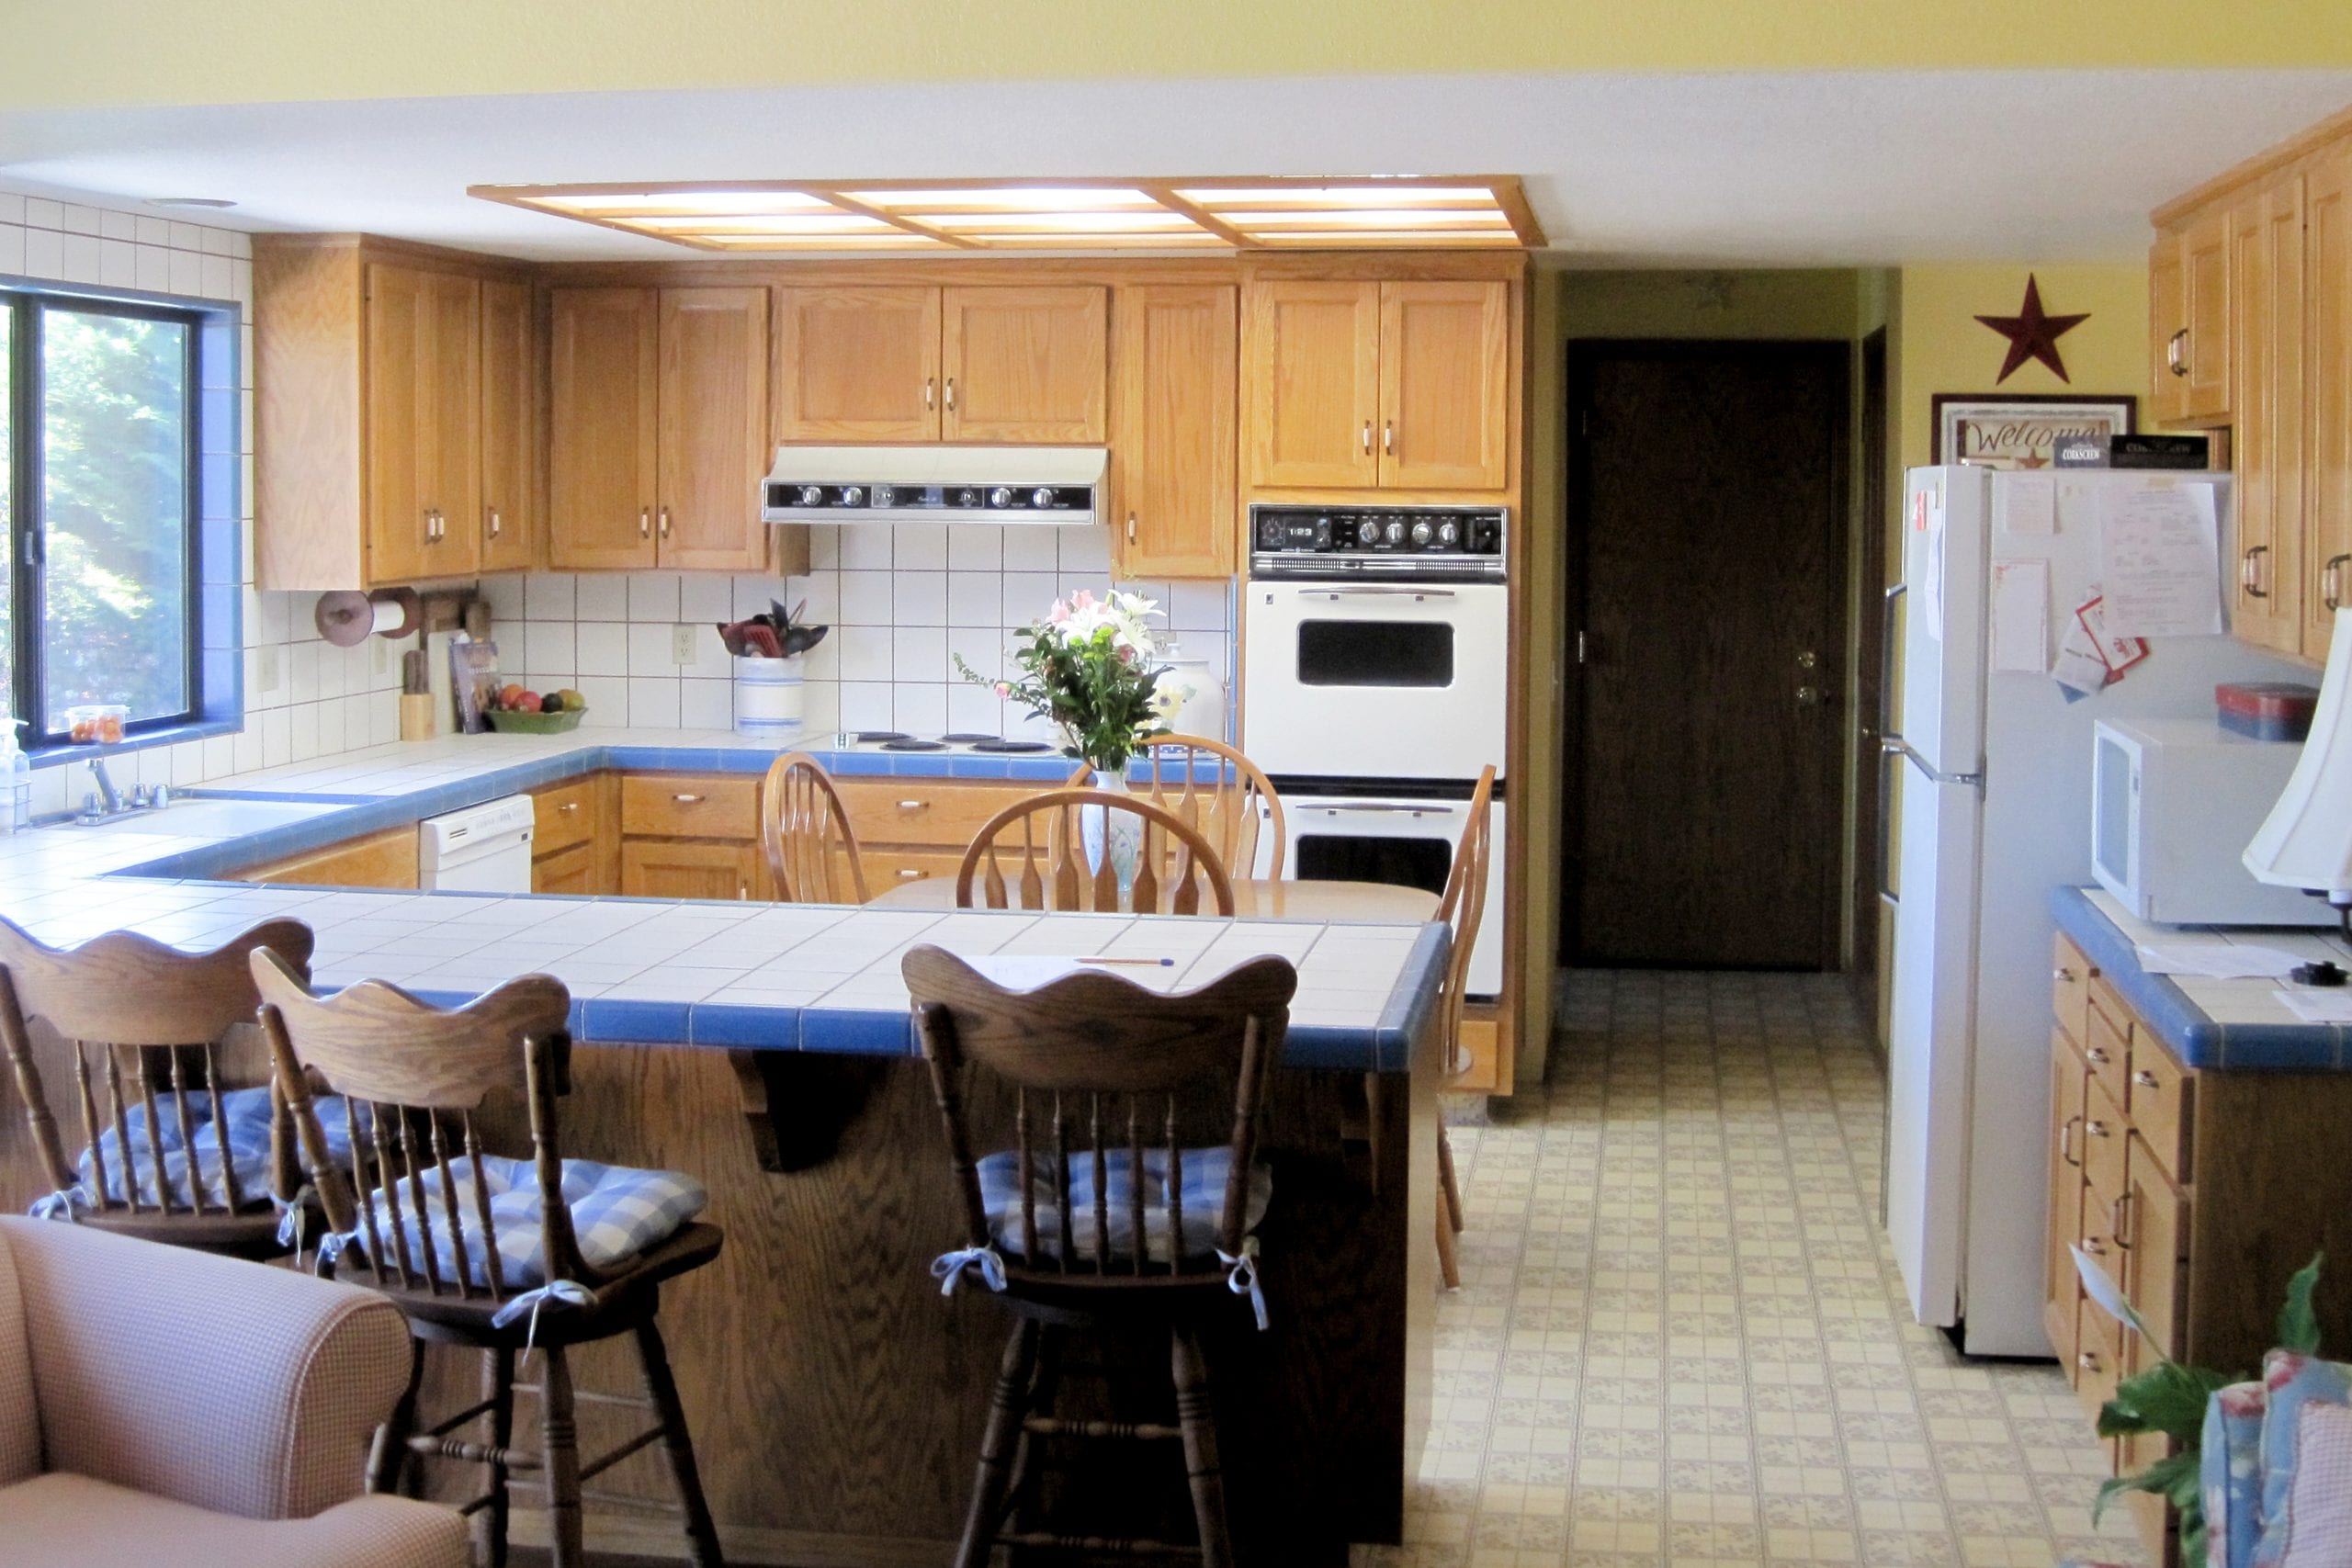 Kitchen remodel before photo showing tile countertops and wooden furnishing